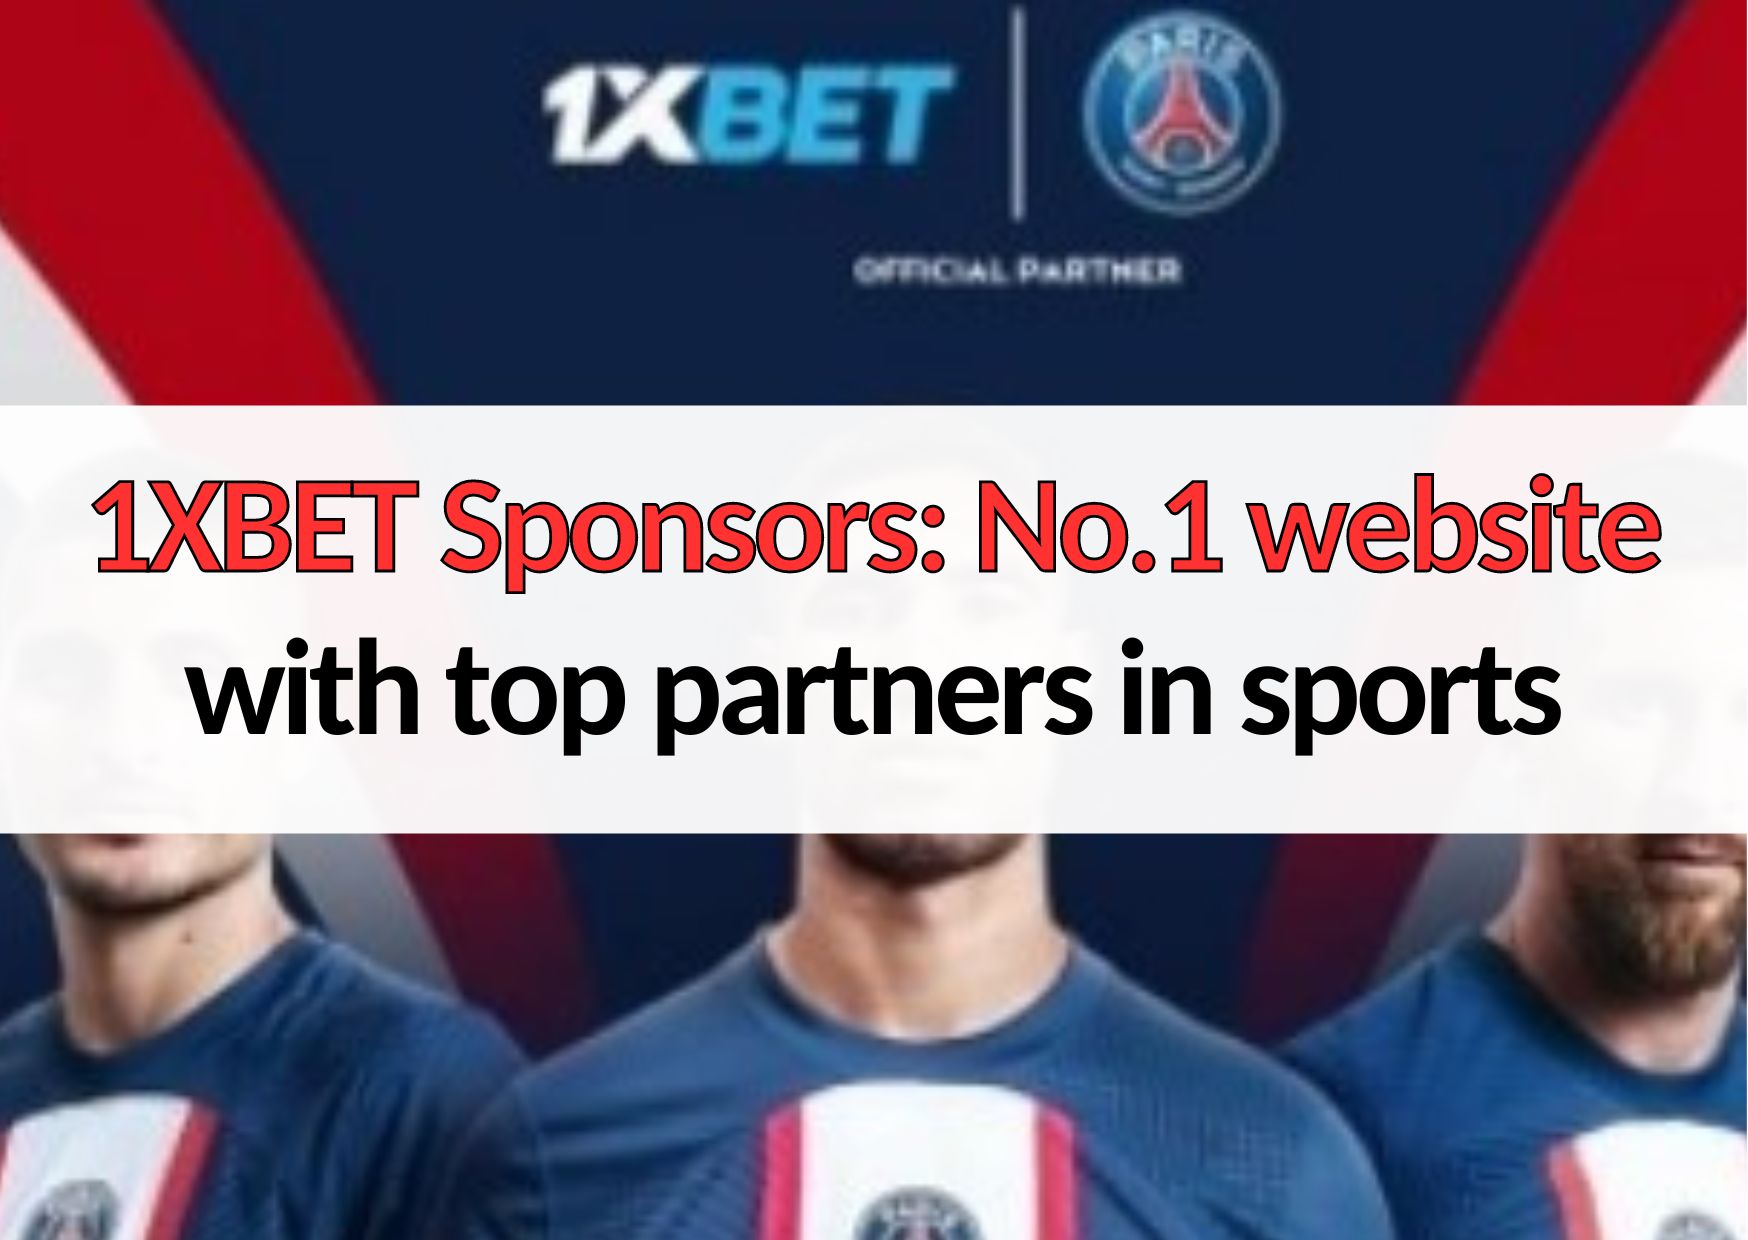 19 1xbet sponsors revealed know the top 1xbet partners in sports